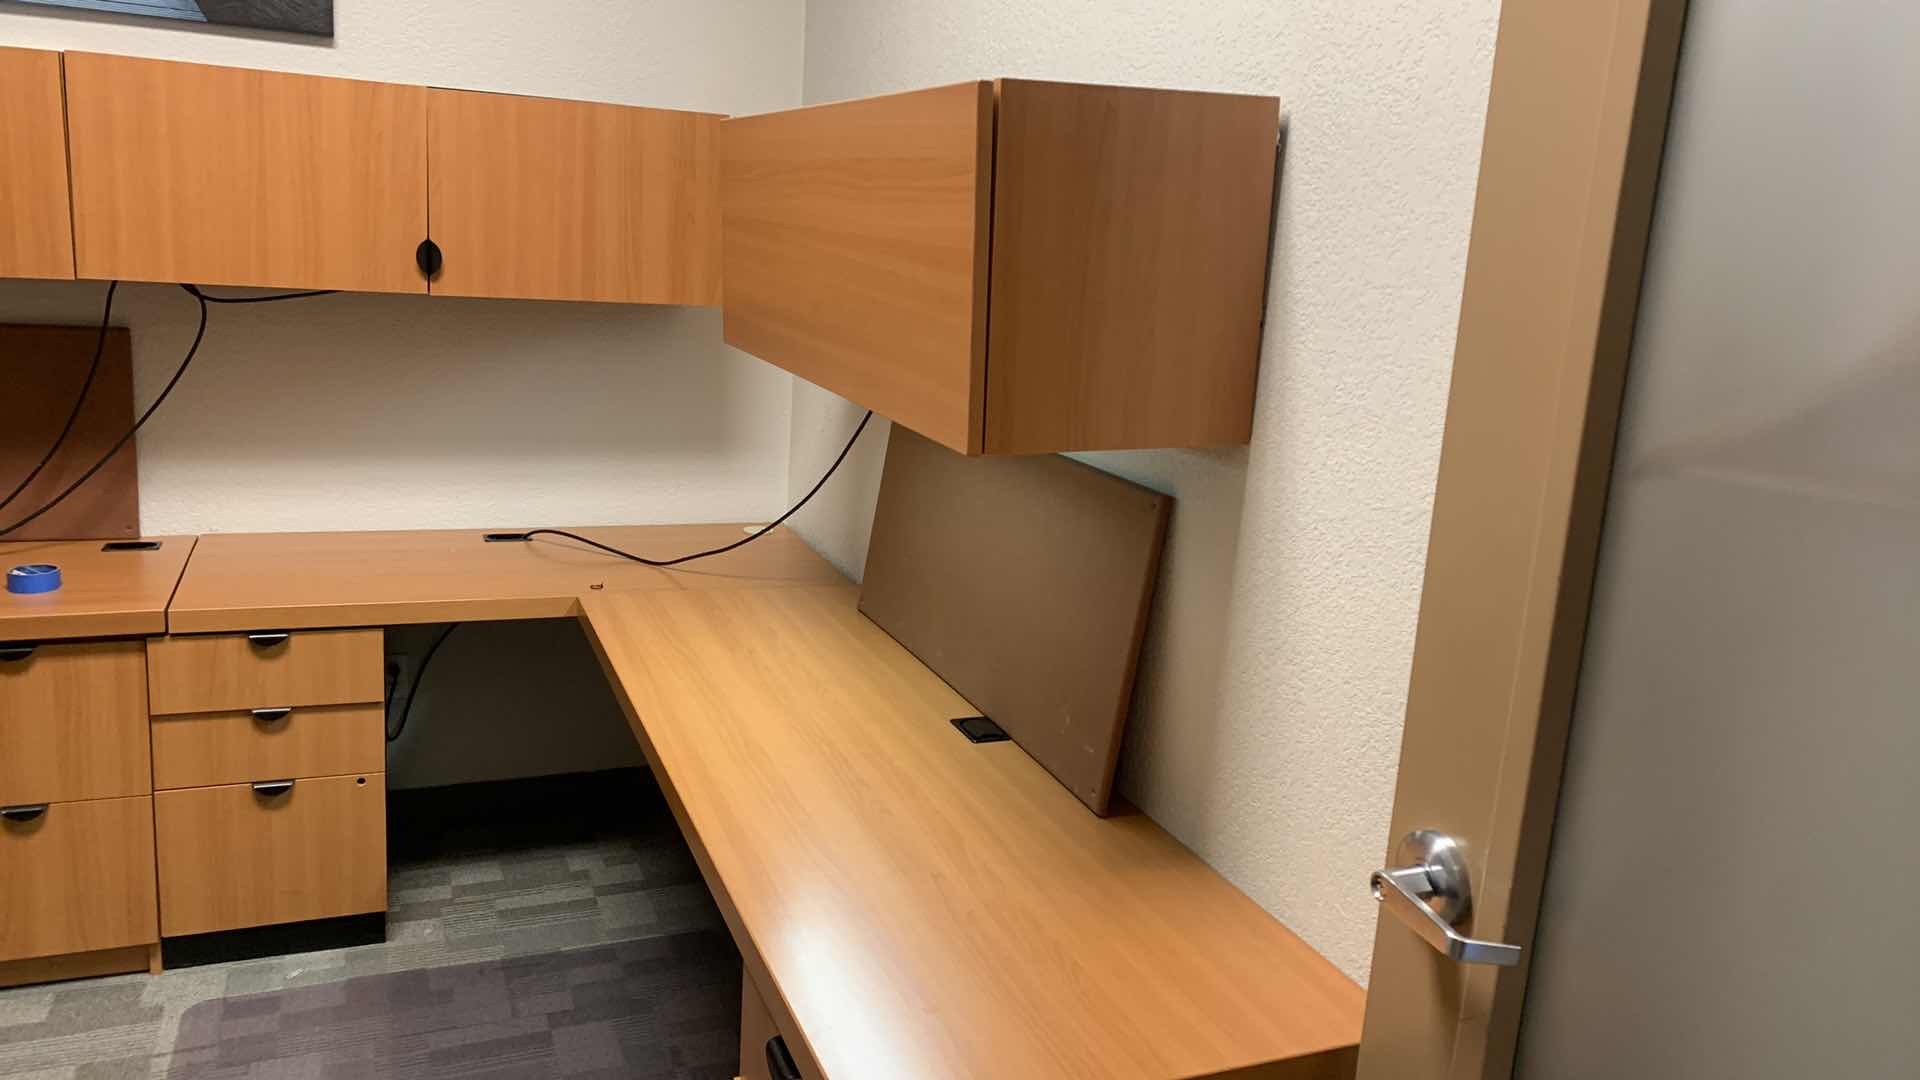 Photo 8 of MAGNA DESIGN LAS VEGAS WOOD WORK STATION/ OFFICE CORNER DESK UNIT 
ONE LOWER DESK  72” x 24” WITH RETURN 52” x 24”, ONE SOUND BOARD AND TWO UPPER CABINETS WITH LIGHTS AND METAL DIVIDERS